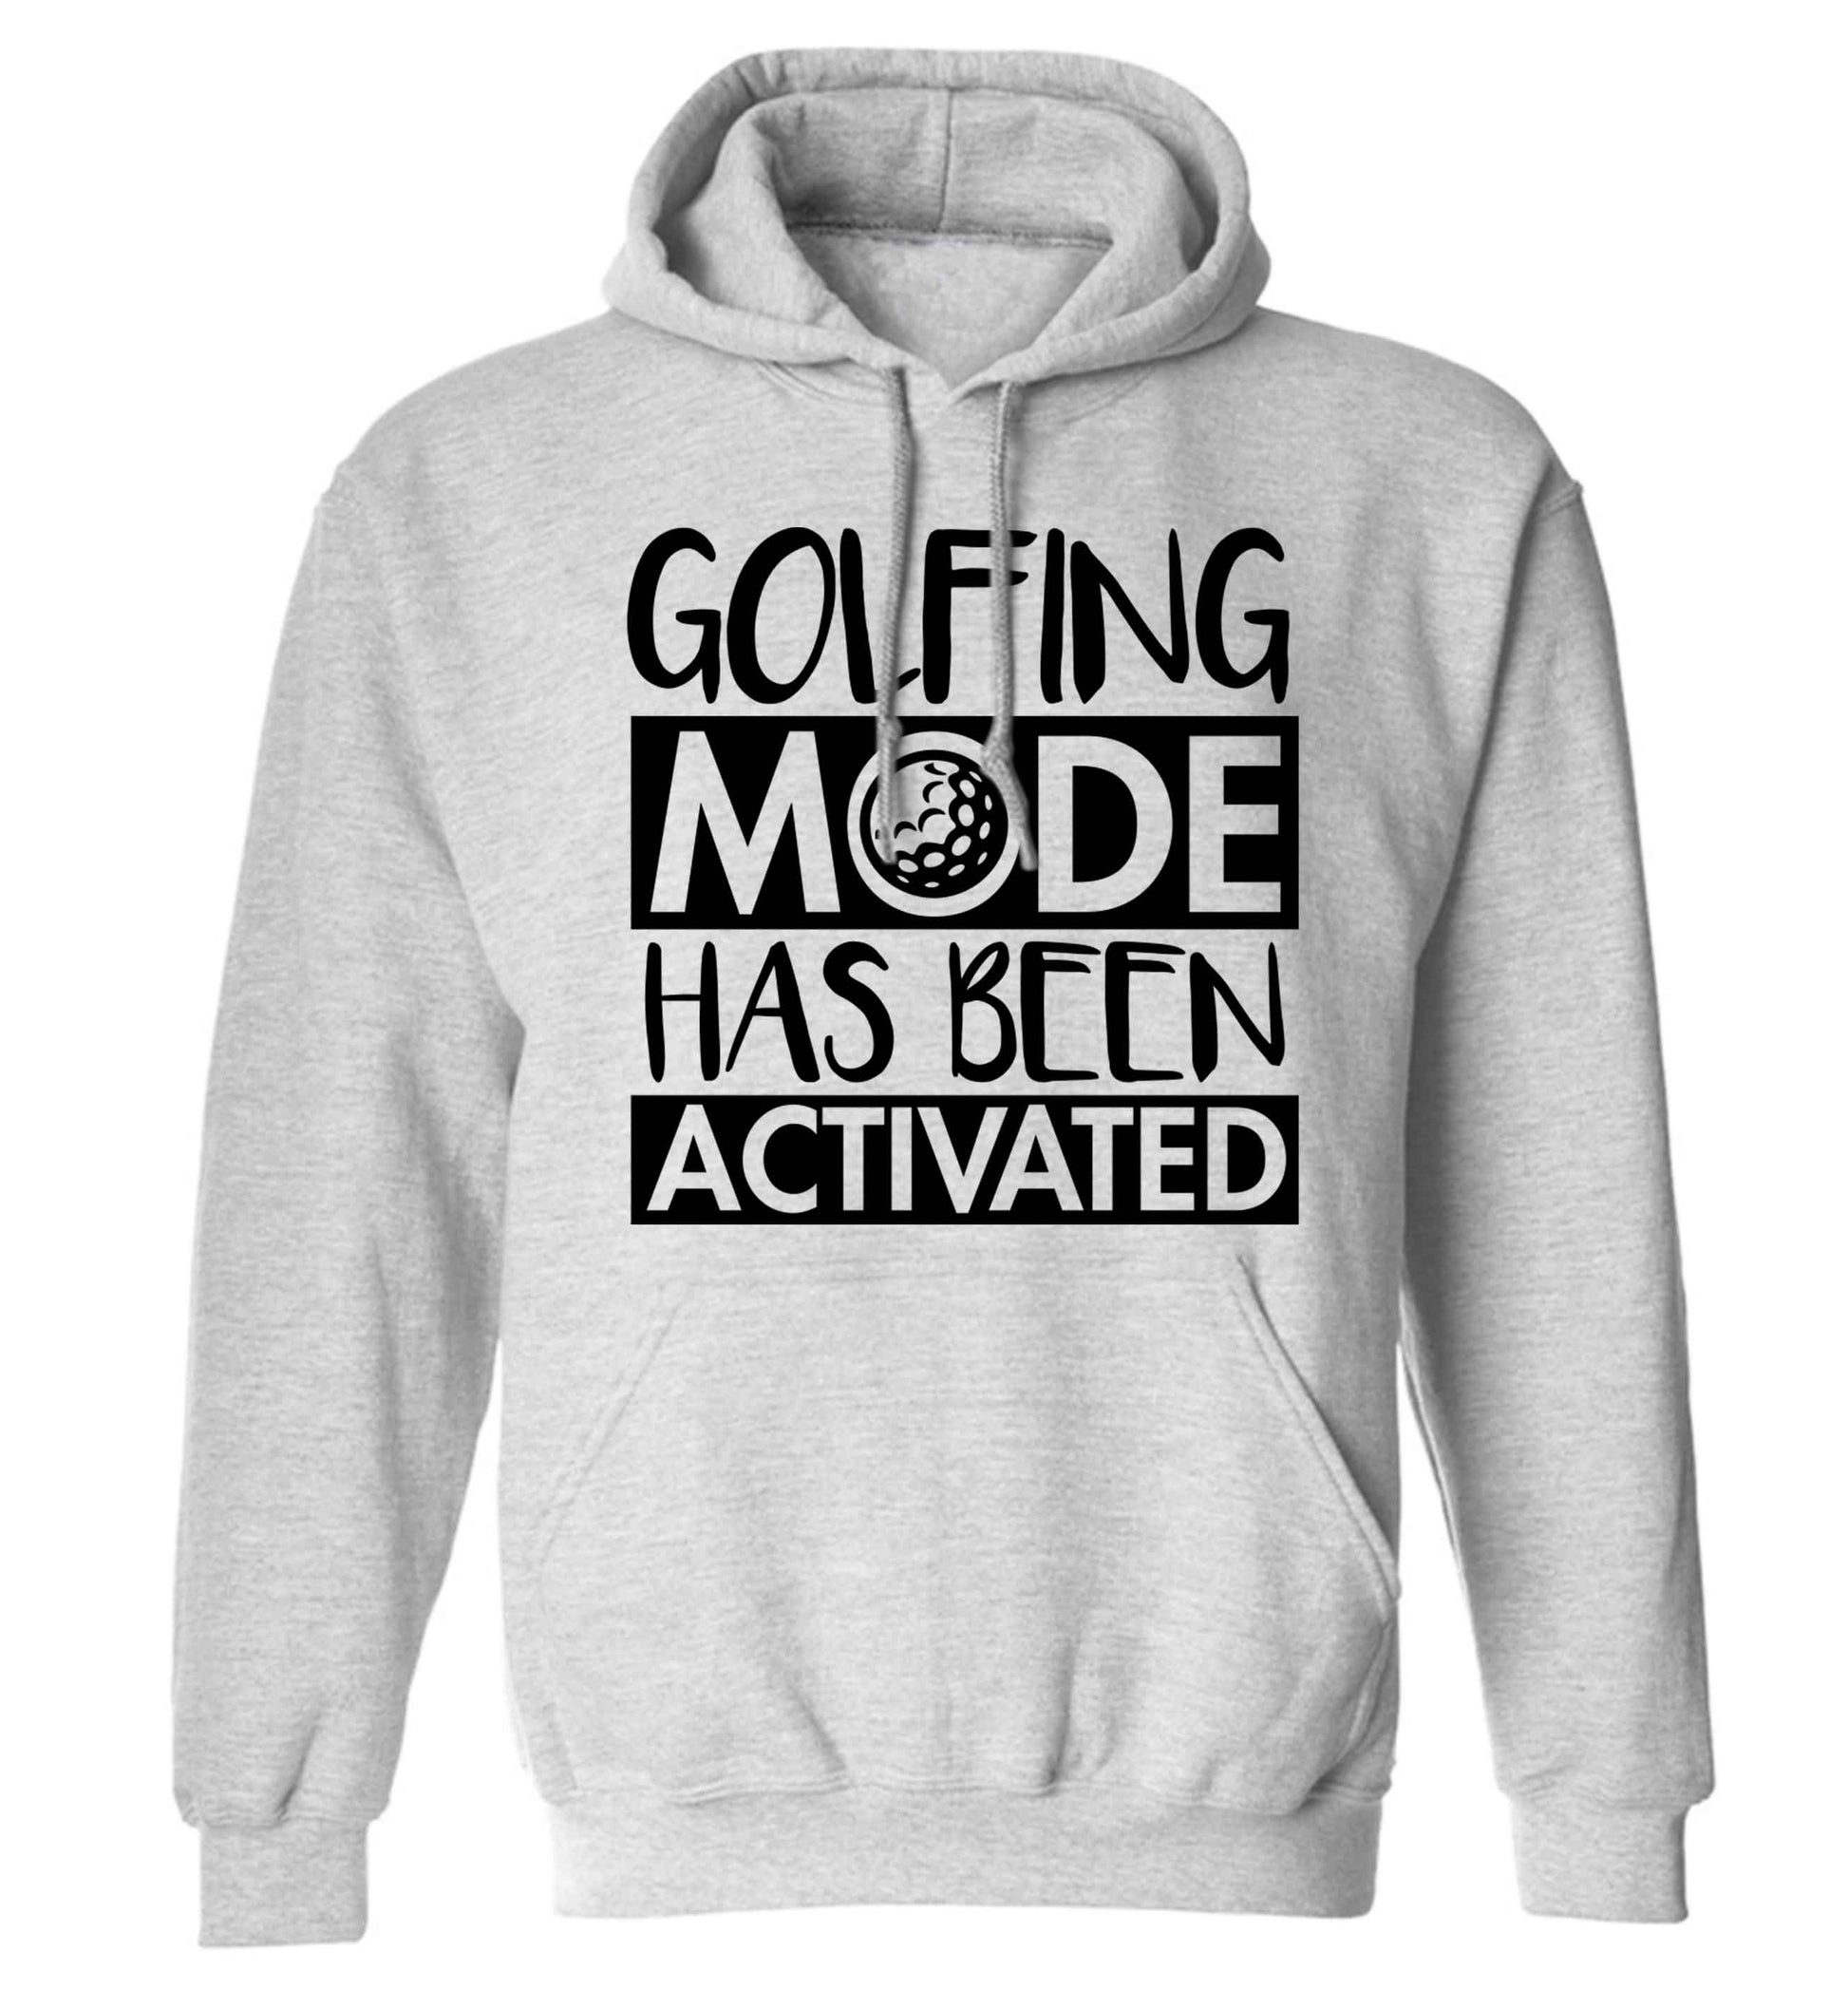 Golfing mode has been activated adults unisex grey hoodie 2XL